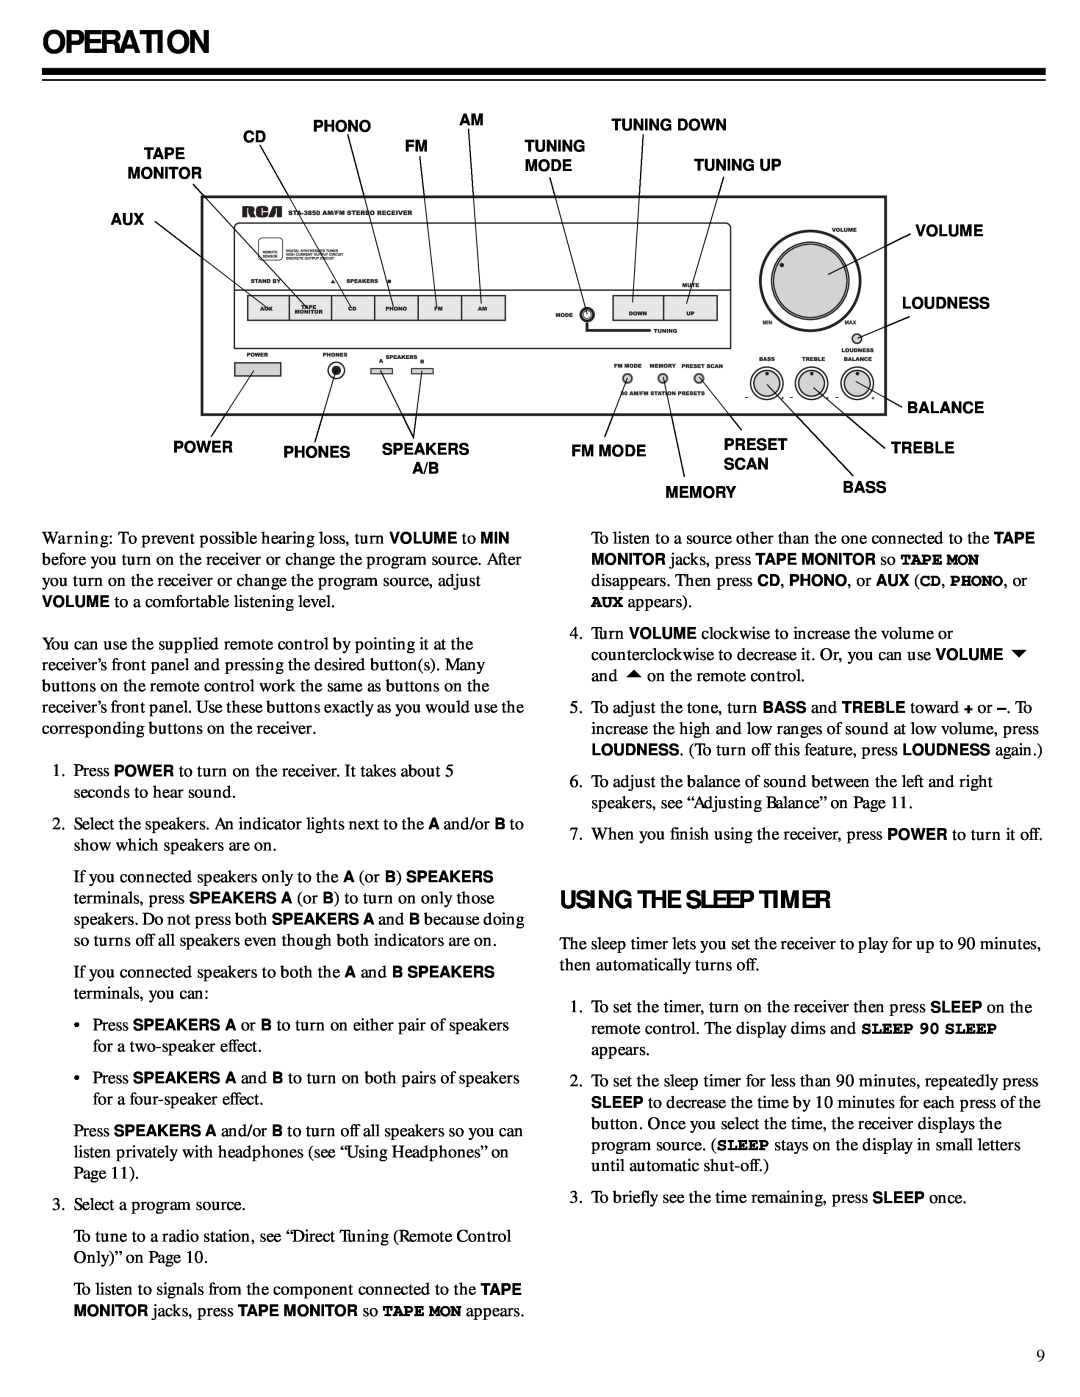 RCA Stereo Receiver with Remote Control owner manual Operation, Using The Sleep Timer 